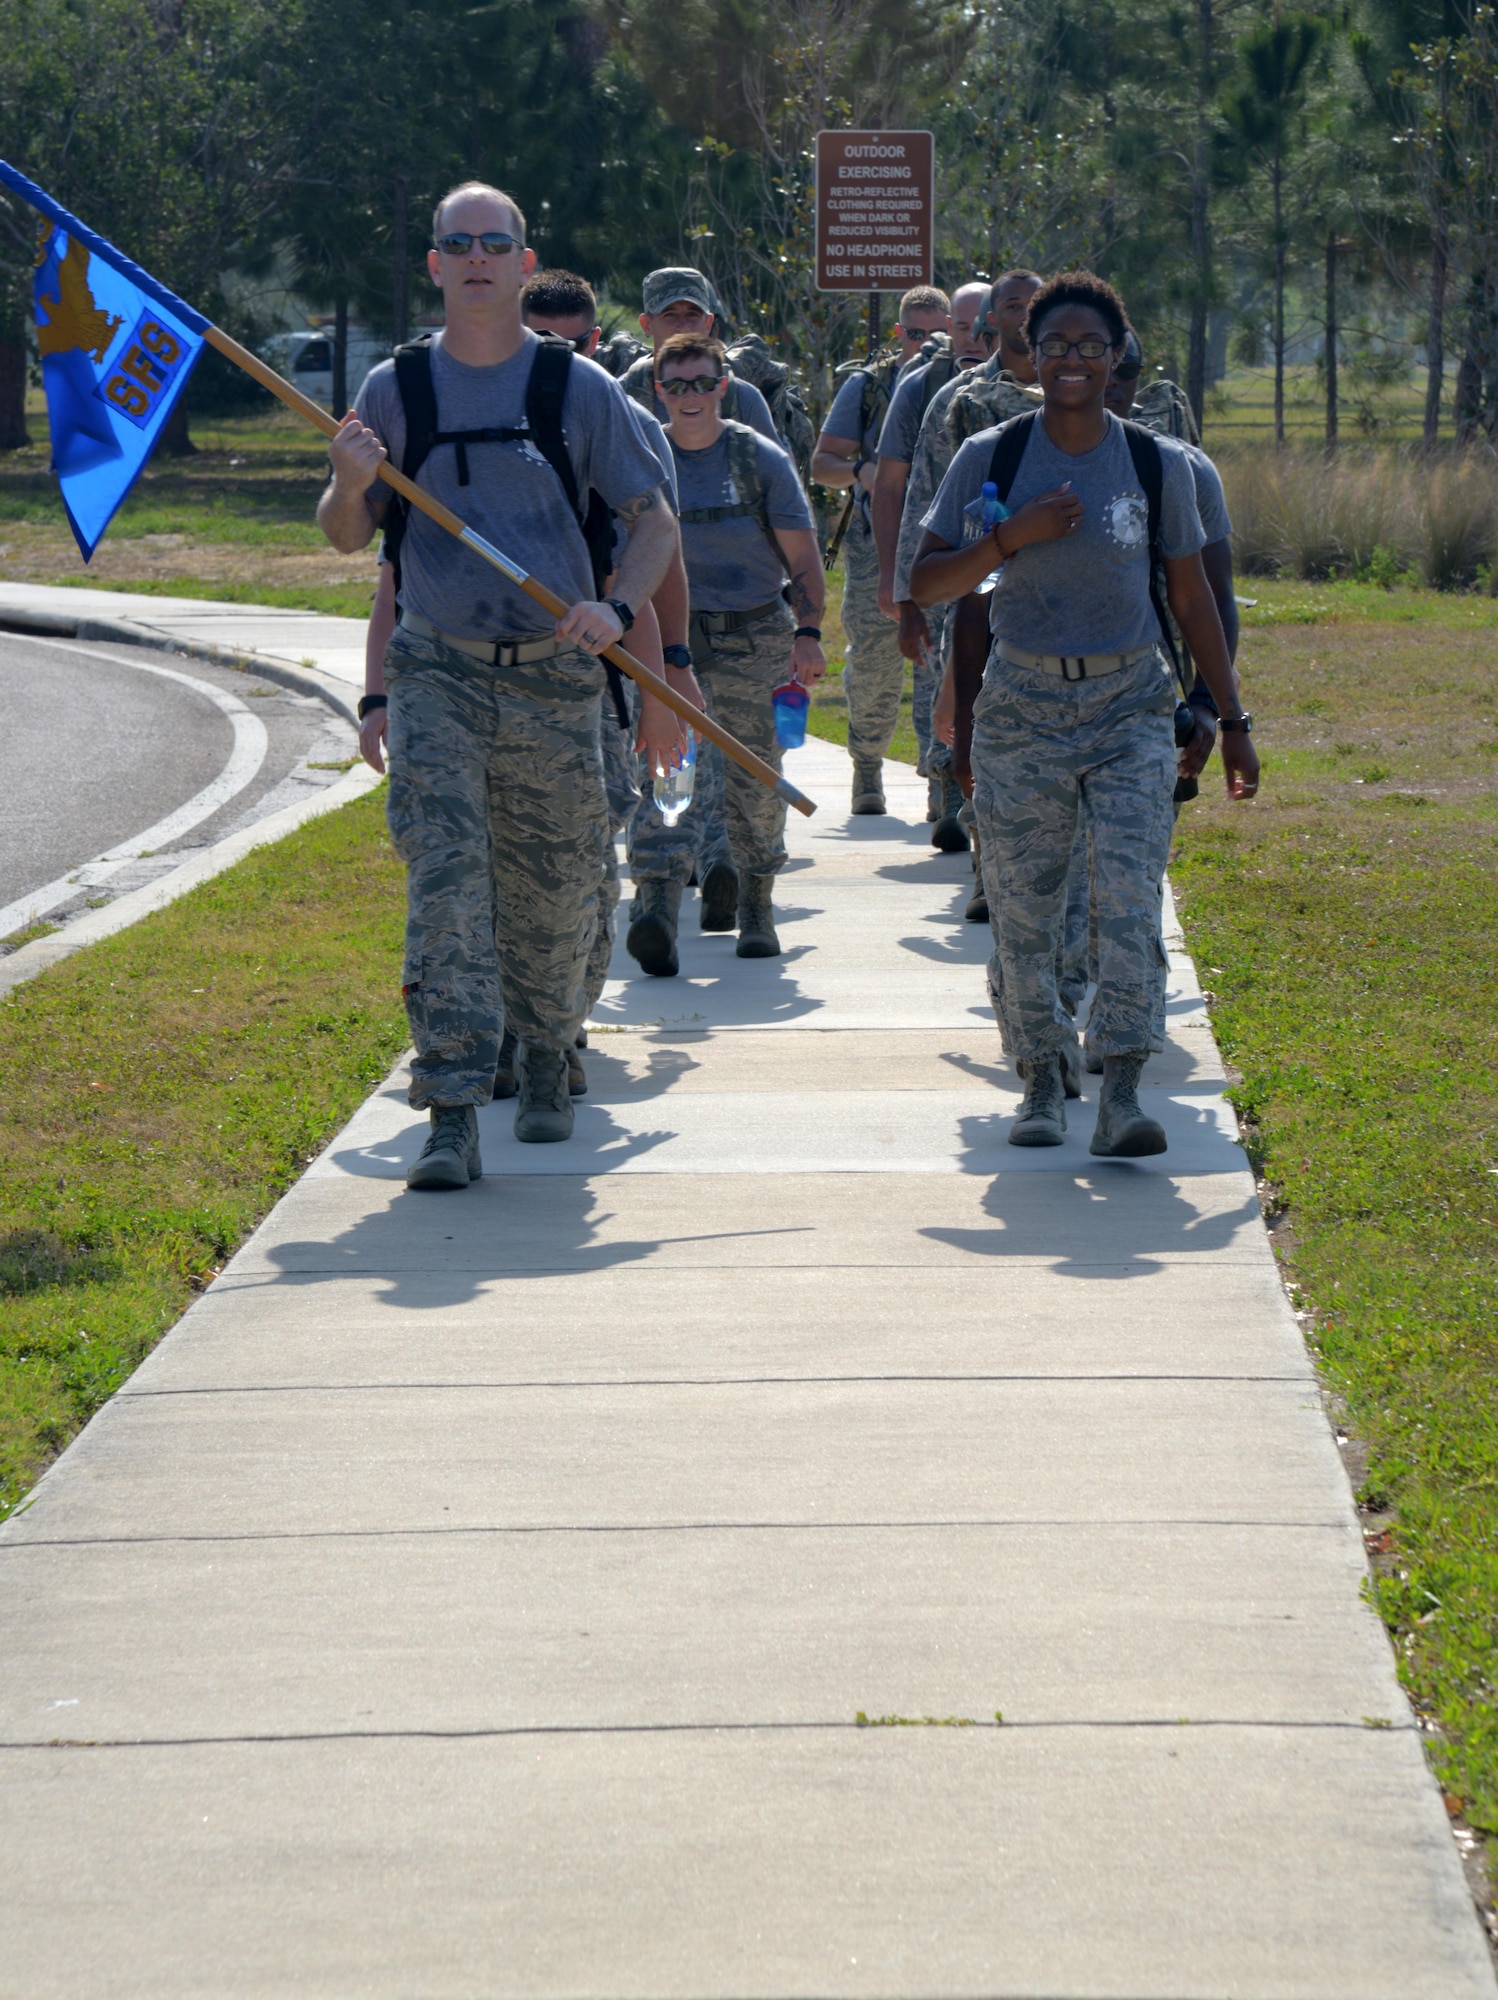 Members from the 6th Security Forces Squadron complete a 5K ruck march in honor of National Police Week at MacDill Air Force Base, Fla., May 15, 2017. MacDill celebrated National Police Week with several events to commemorate the contributions and sacrifices of law enforcement officials around the world. (U.S. Air Force photo by Senior Airman Tori Long)